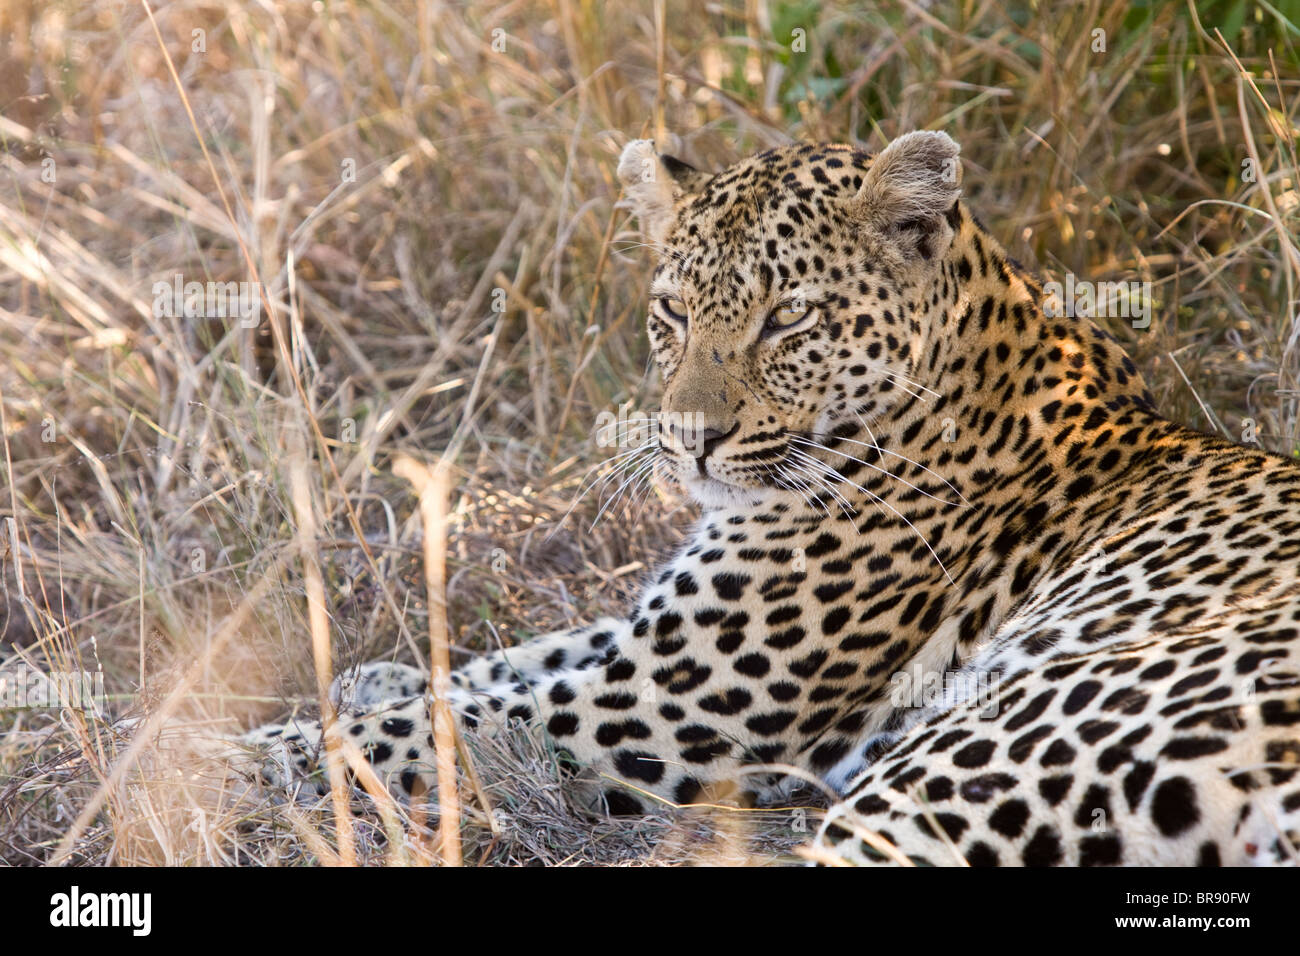 A Leopard, Panthera pardus, resting in Kruger National Park, South Africa Stock Photo